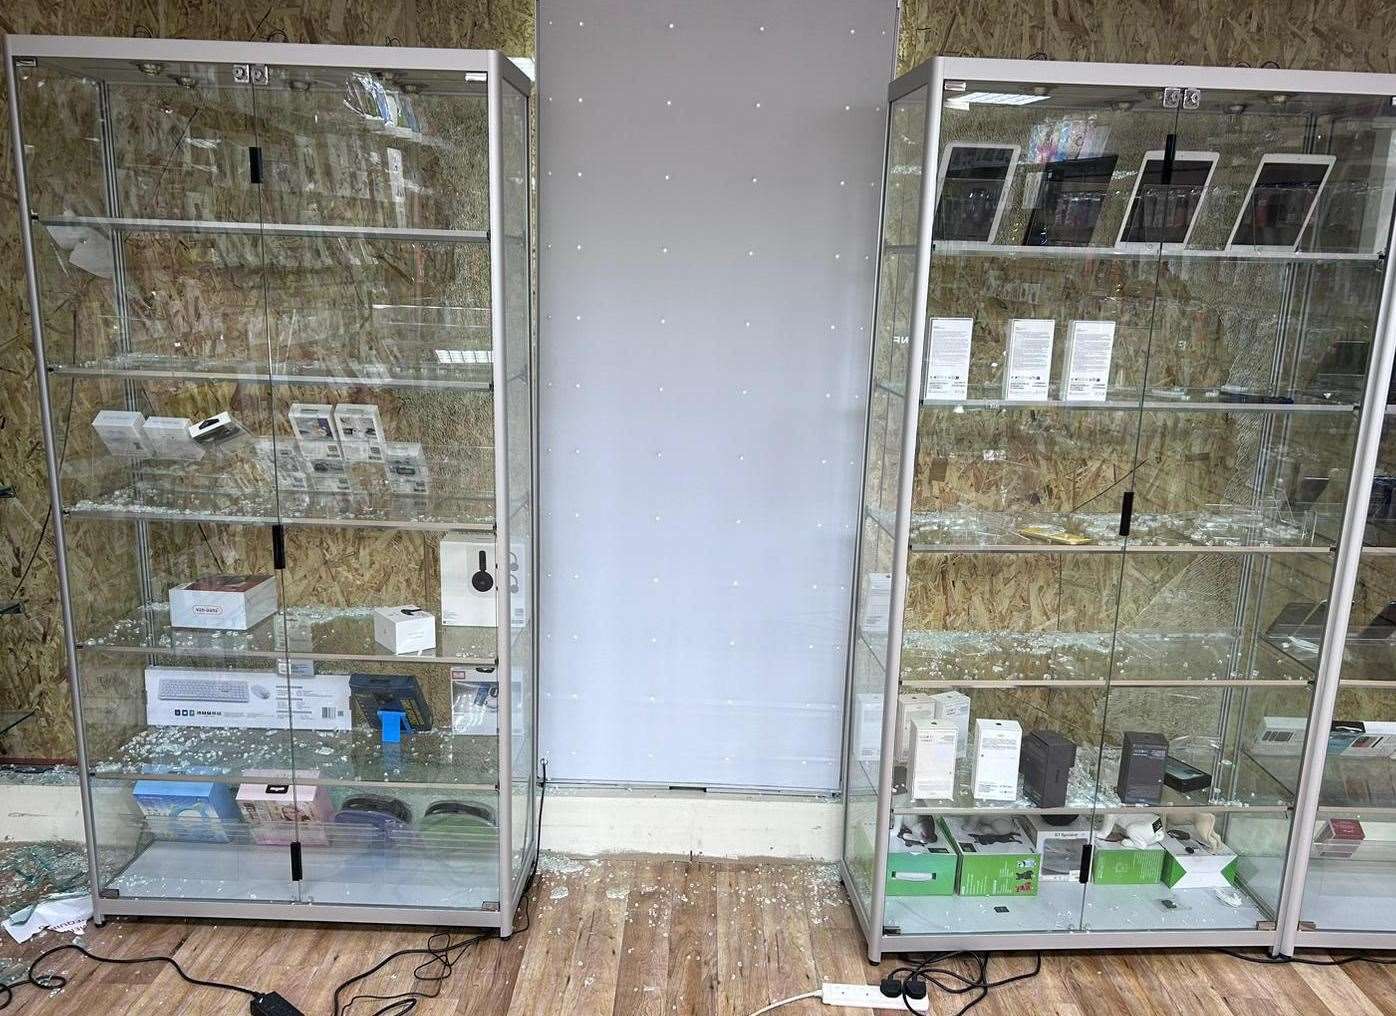 Some of the cabinets in Fone Fix were smashed during the burglary. Picture: Deepak Dhall